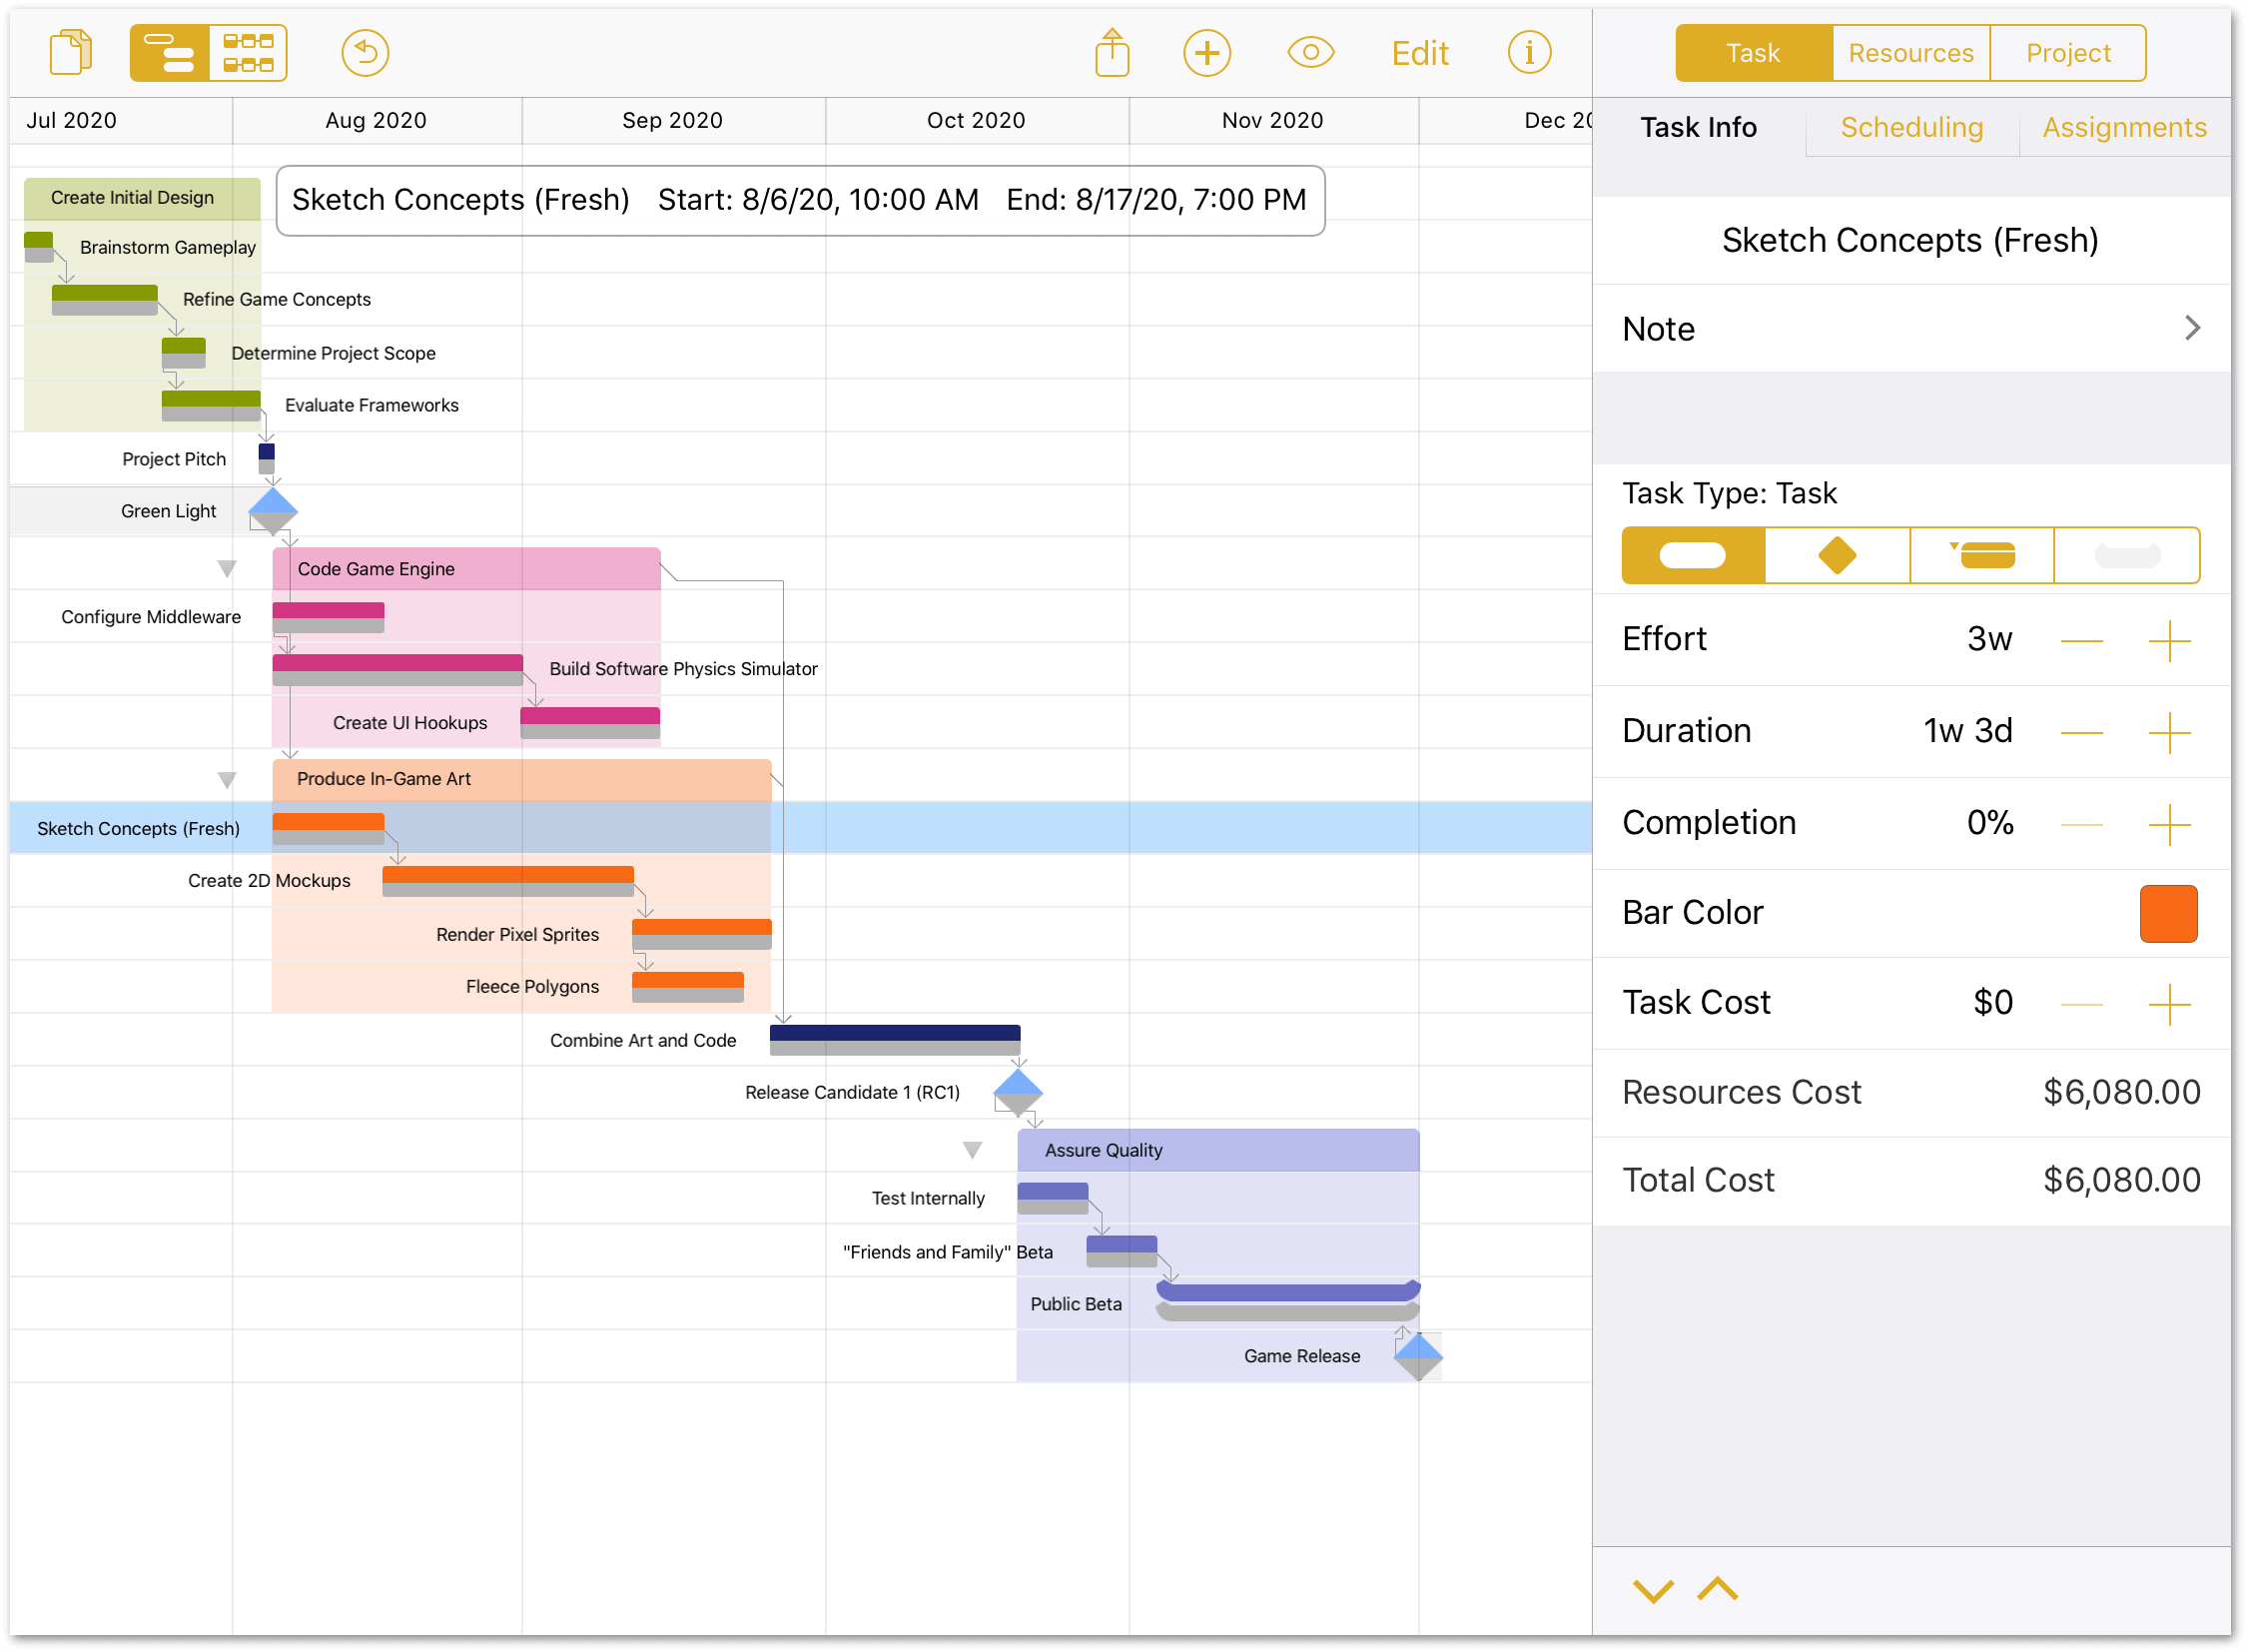 The Project Pitch is selected in the project editor, and the Task Info tab is highlighted in the Task inspector